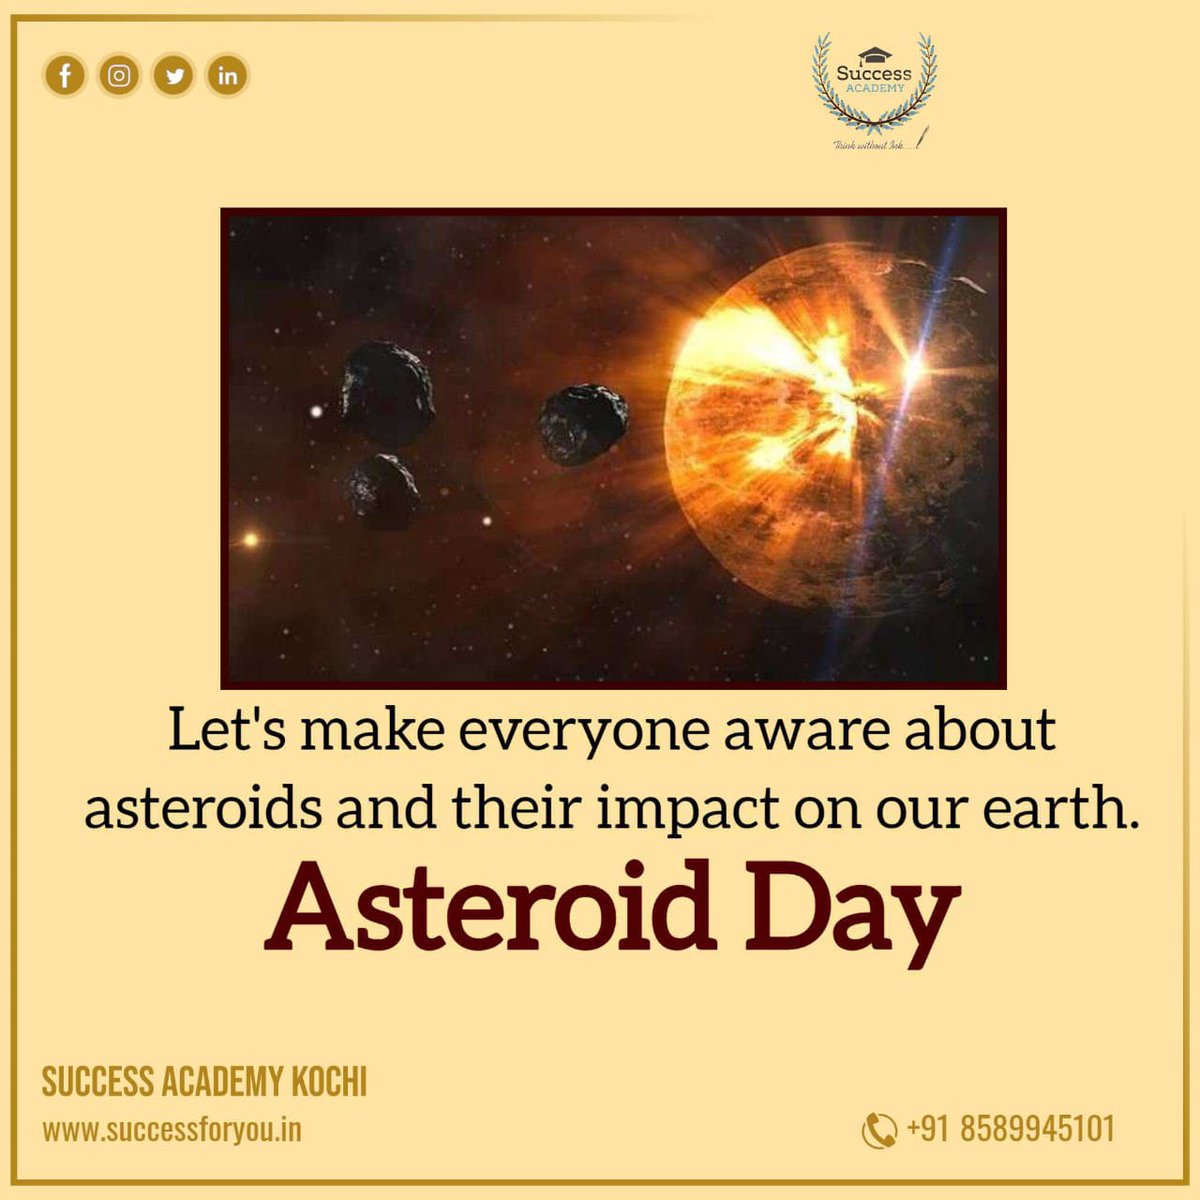 #AsteroidDay #ProtectOurPlanet #AsteroidAwareness #SpaceScience #SaveEarth #AsteroidThreat #AsteroidImpact #SpaceExploration #AsteroidResearch #ImpactAwareness #AsteroidDay2023 #AsteroidSafety #DeflectAsteroids
#SpaceMissions #SSCCoaching #BankCoaching #SuccessAcademyKochi